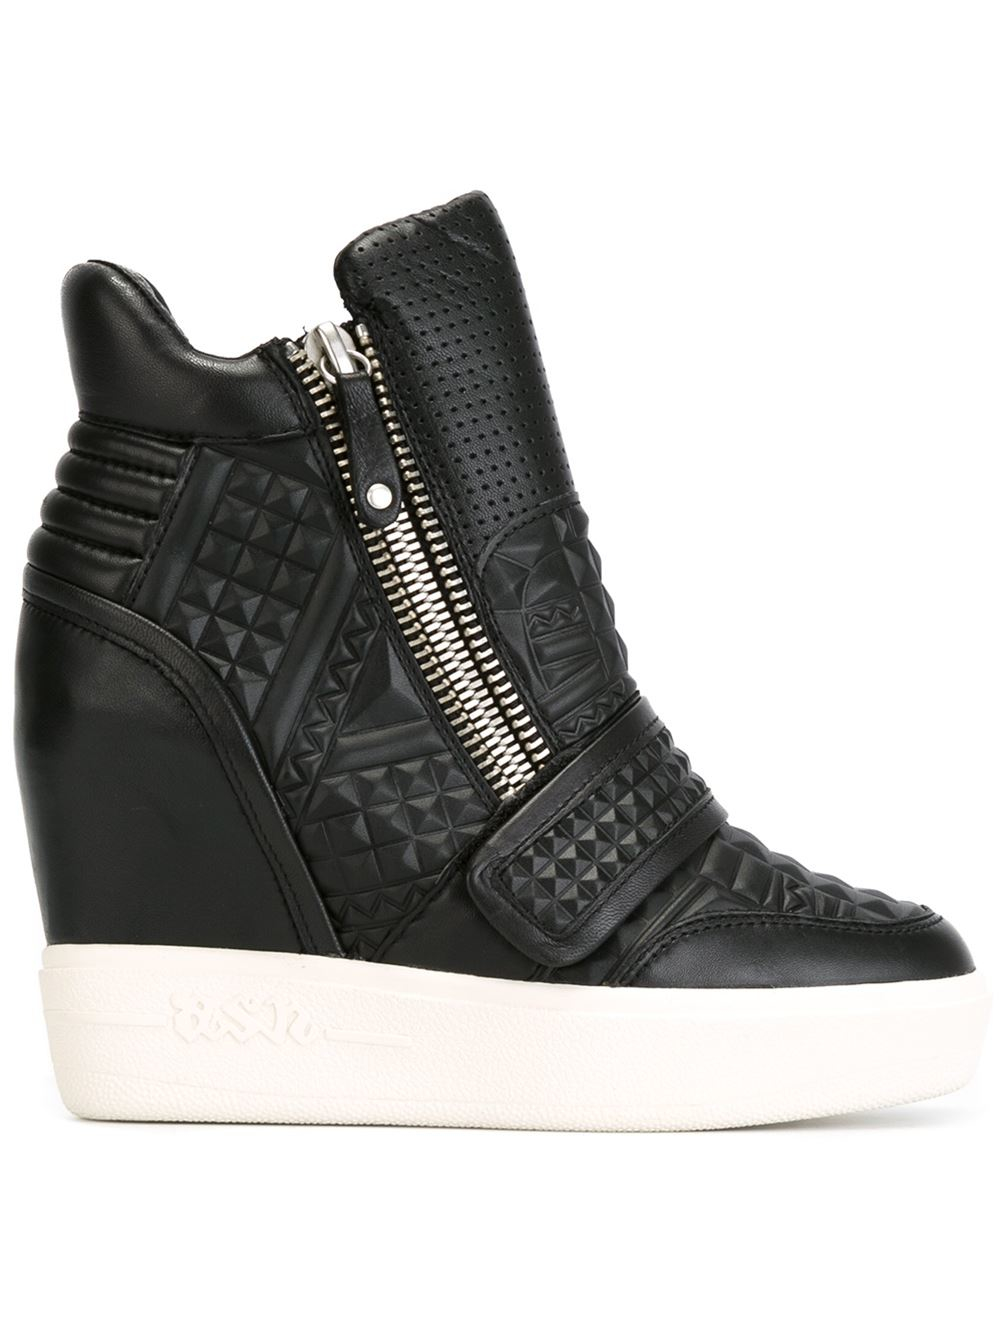 black wedge sneakers with spikes